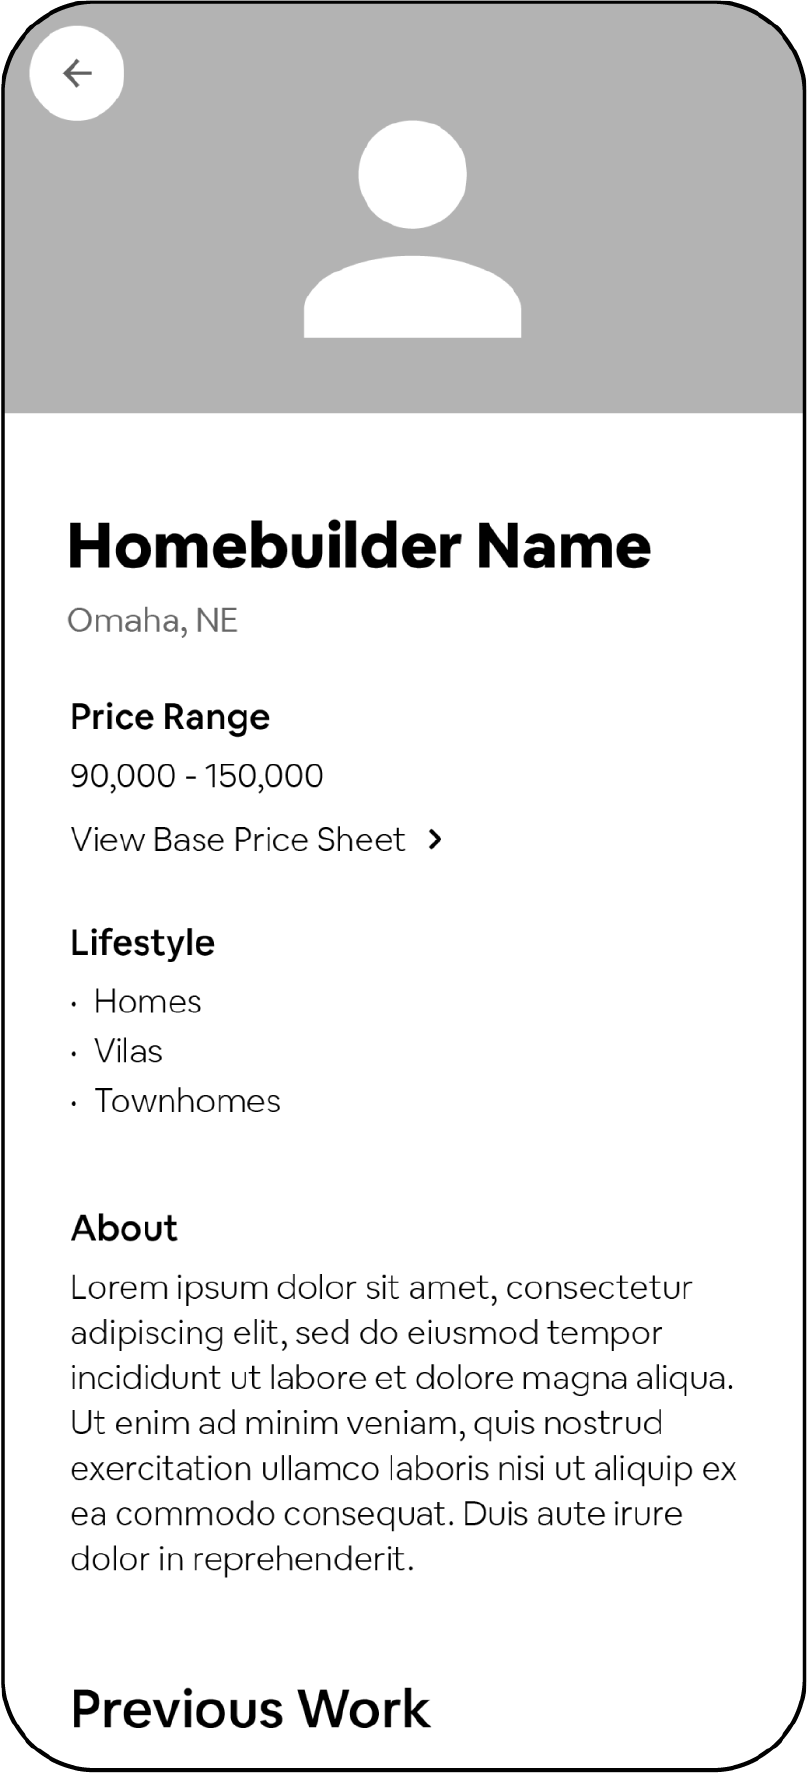 This is a black and white wireframe of the Builter mobile app. This wireframe shows the homebuilder name, location, price range, lifestyle categories, about, and previous work.